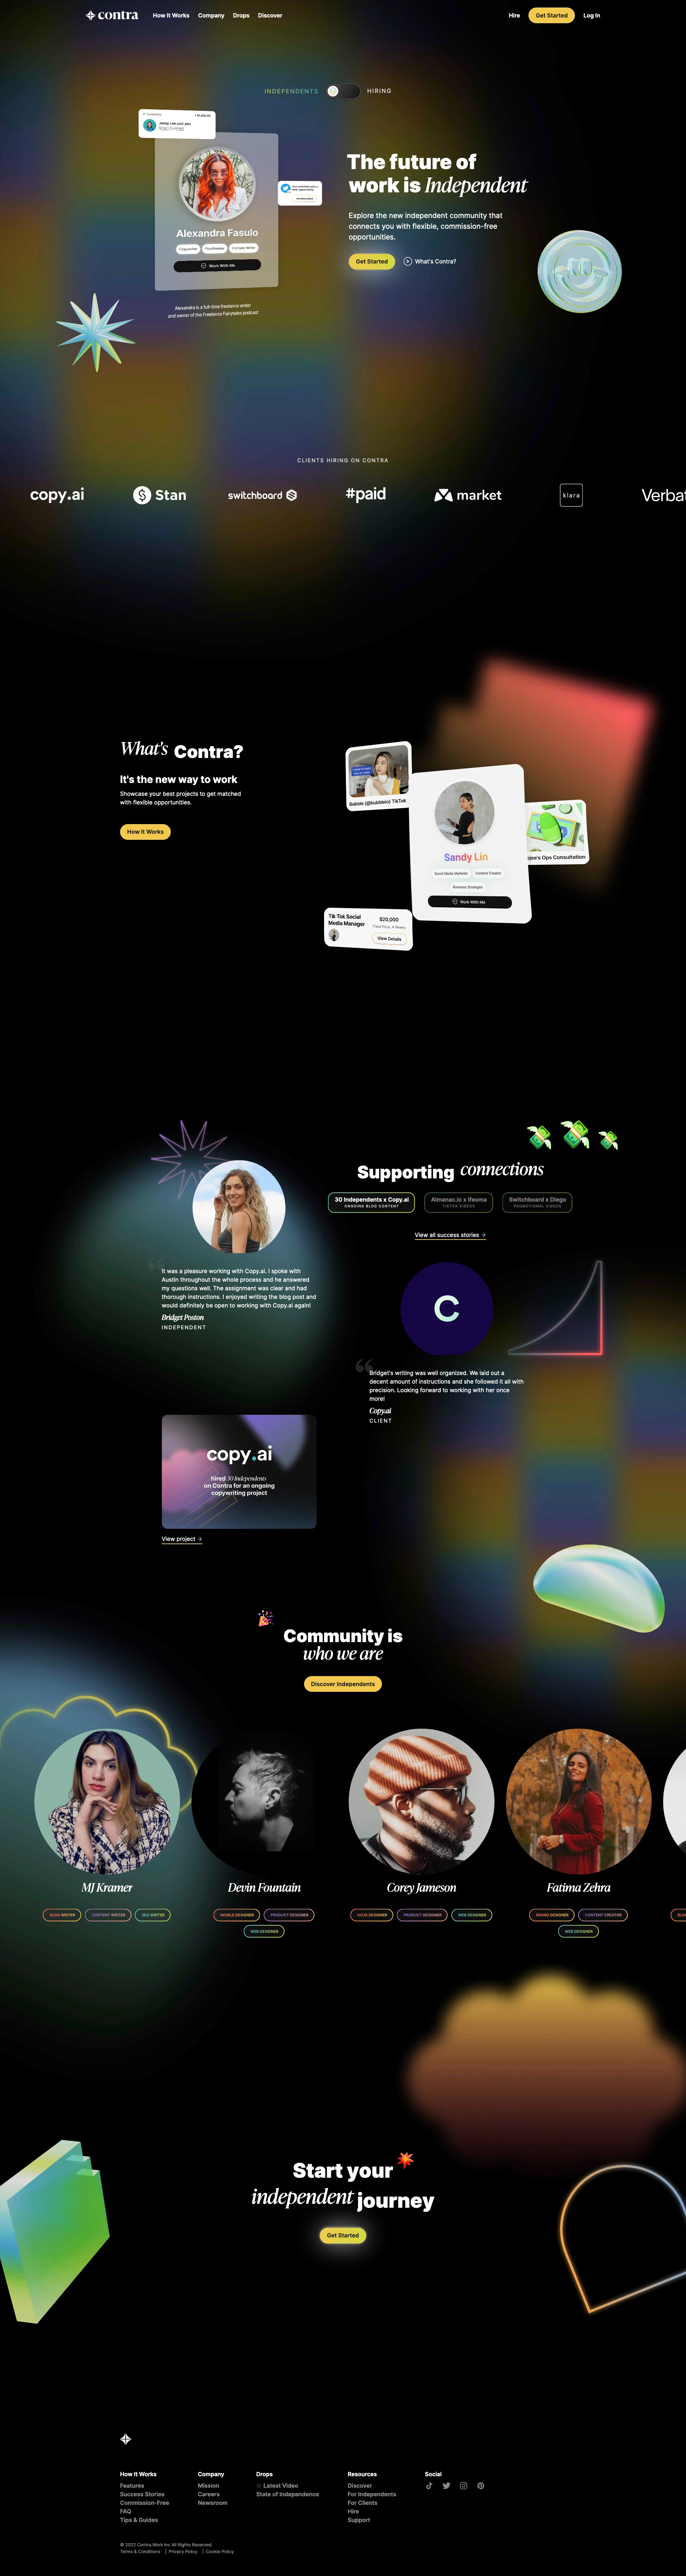 Contra Landing Page Example: Contra is the Independent-first community and hiring platform shaping the future of work — commission-free, always. You bring the skills, we provide the tools and opportunities.